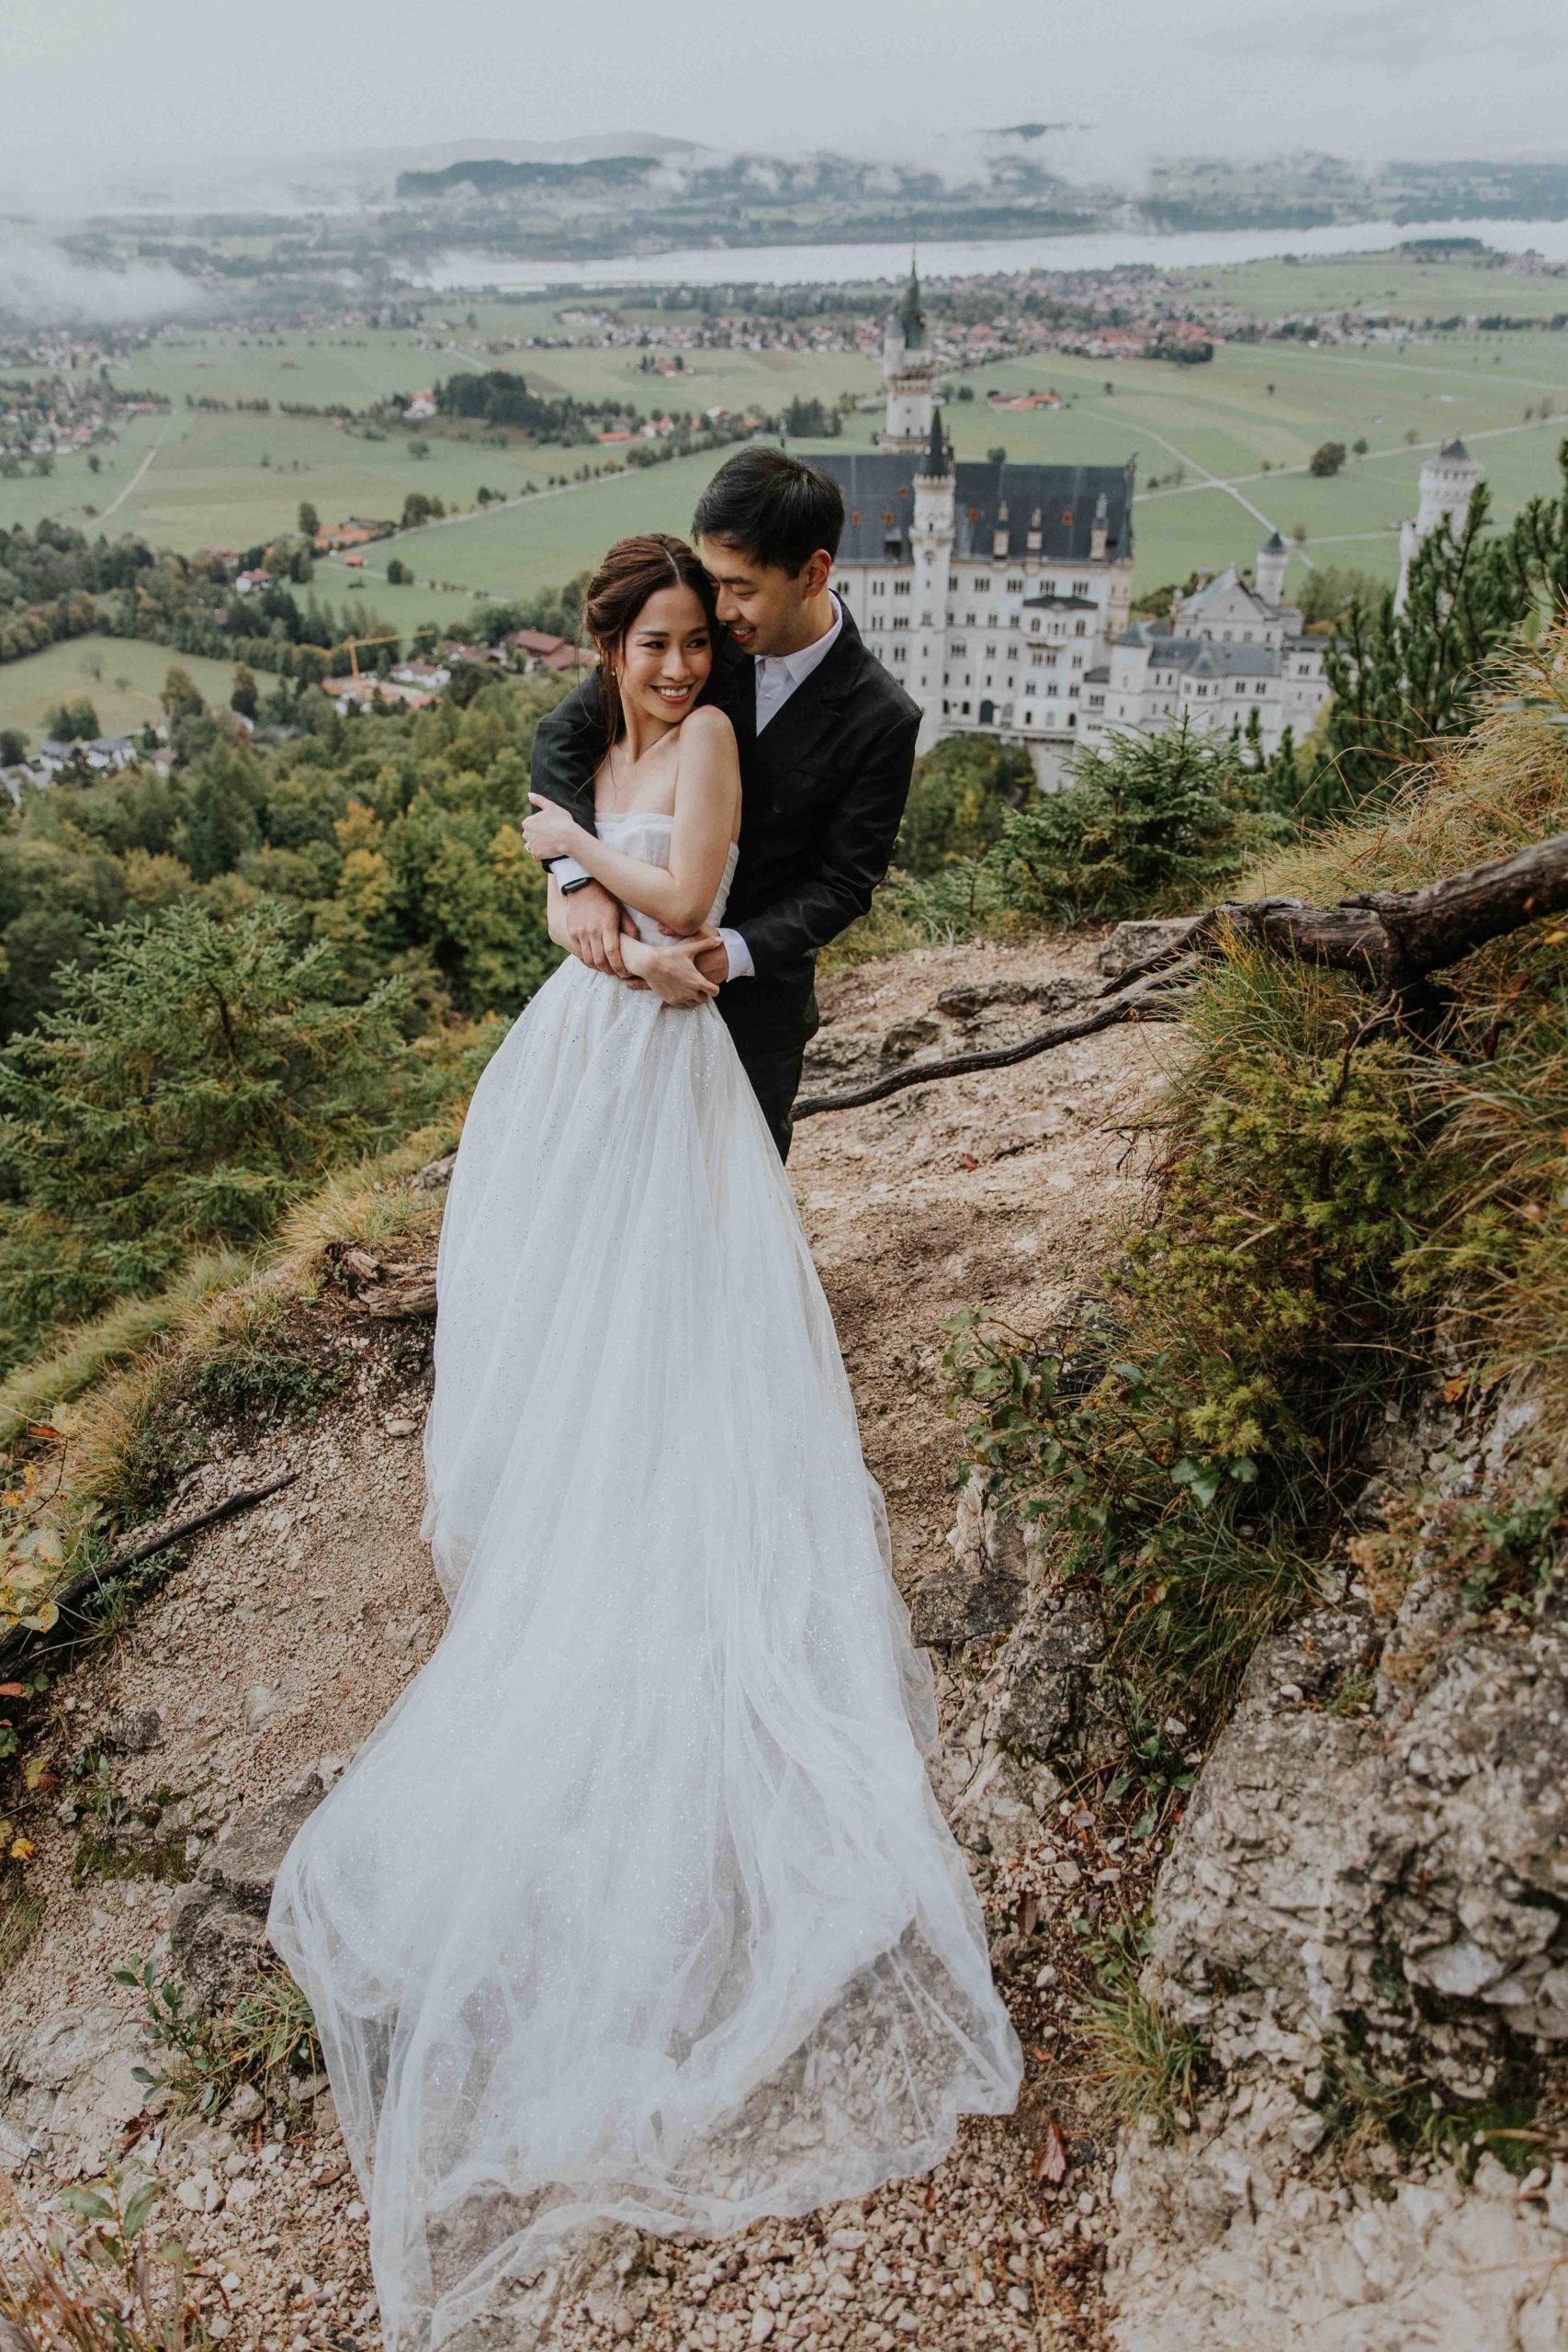 A couple embraces during their Pre wedding photo session outside schloss neuschwanstein in Germany